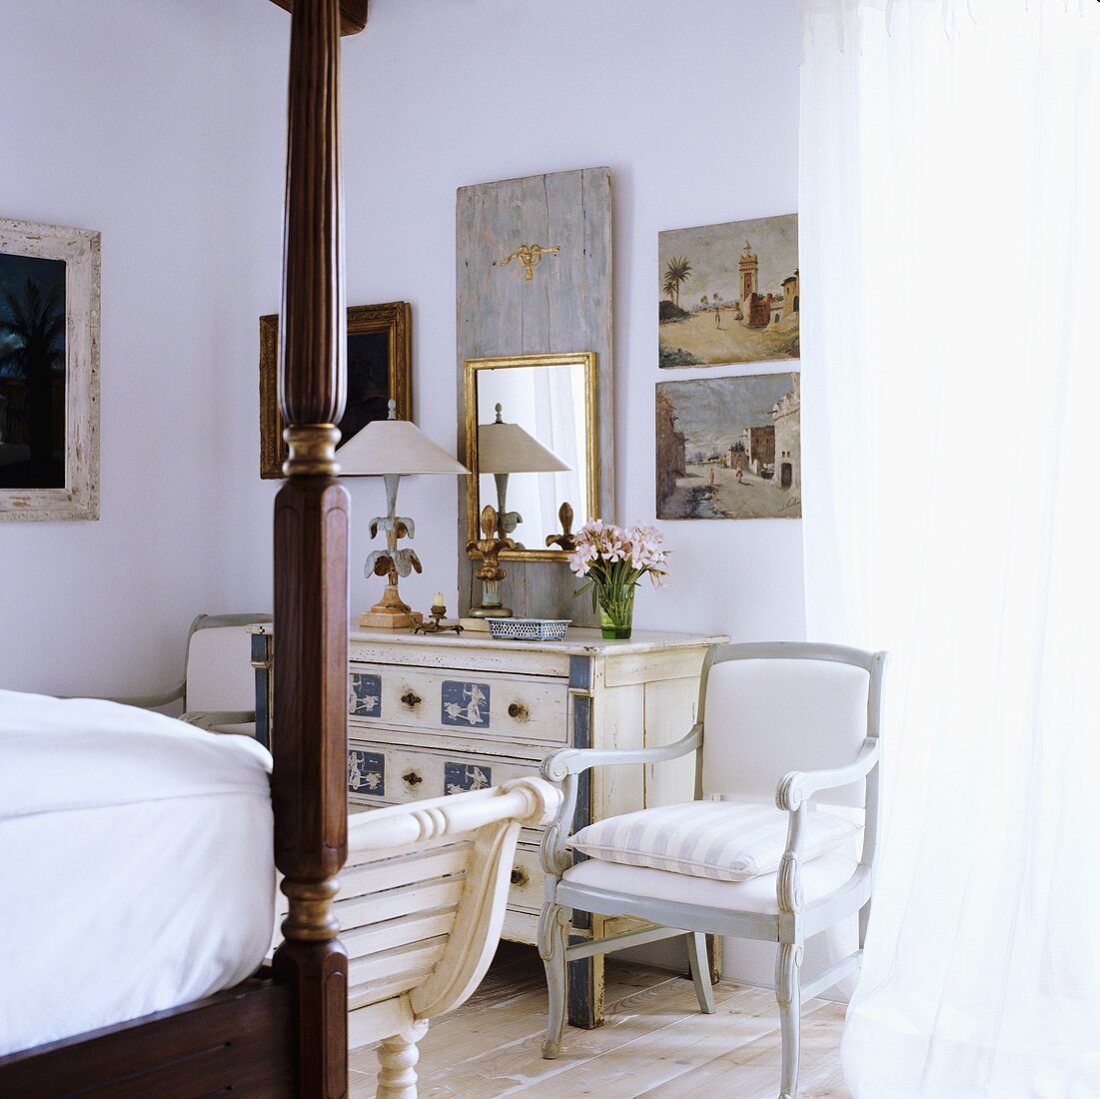 A bedroom with antique, white-painted country house-style furniture